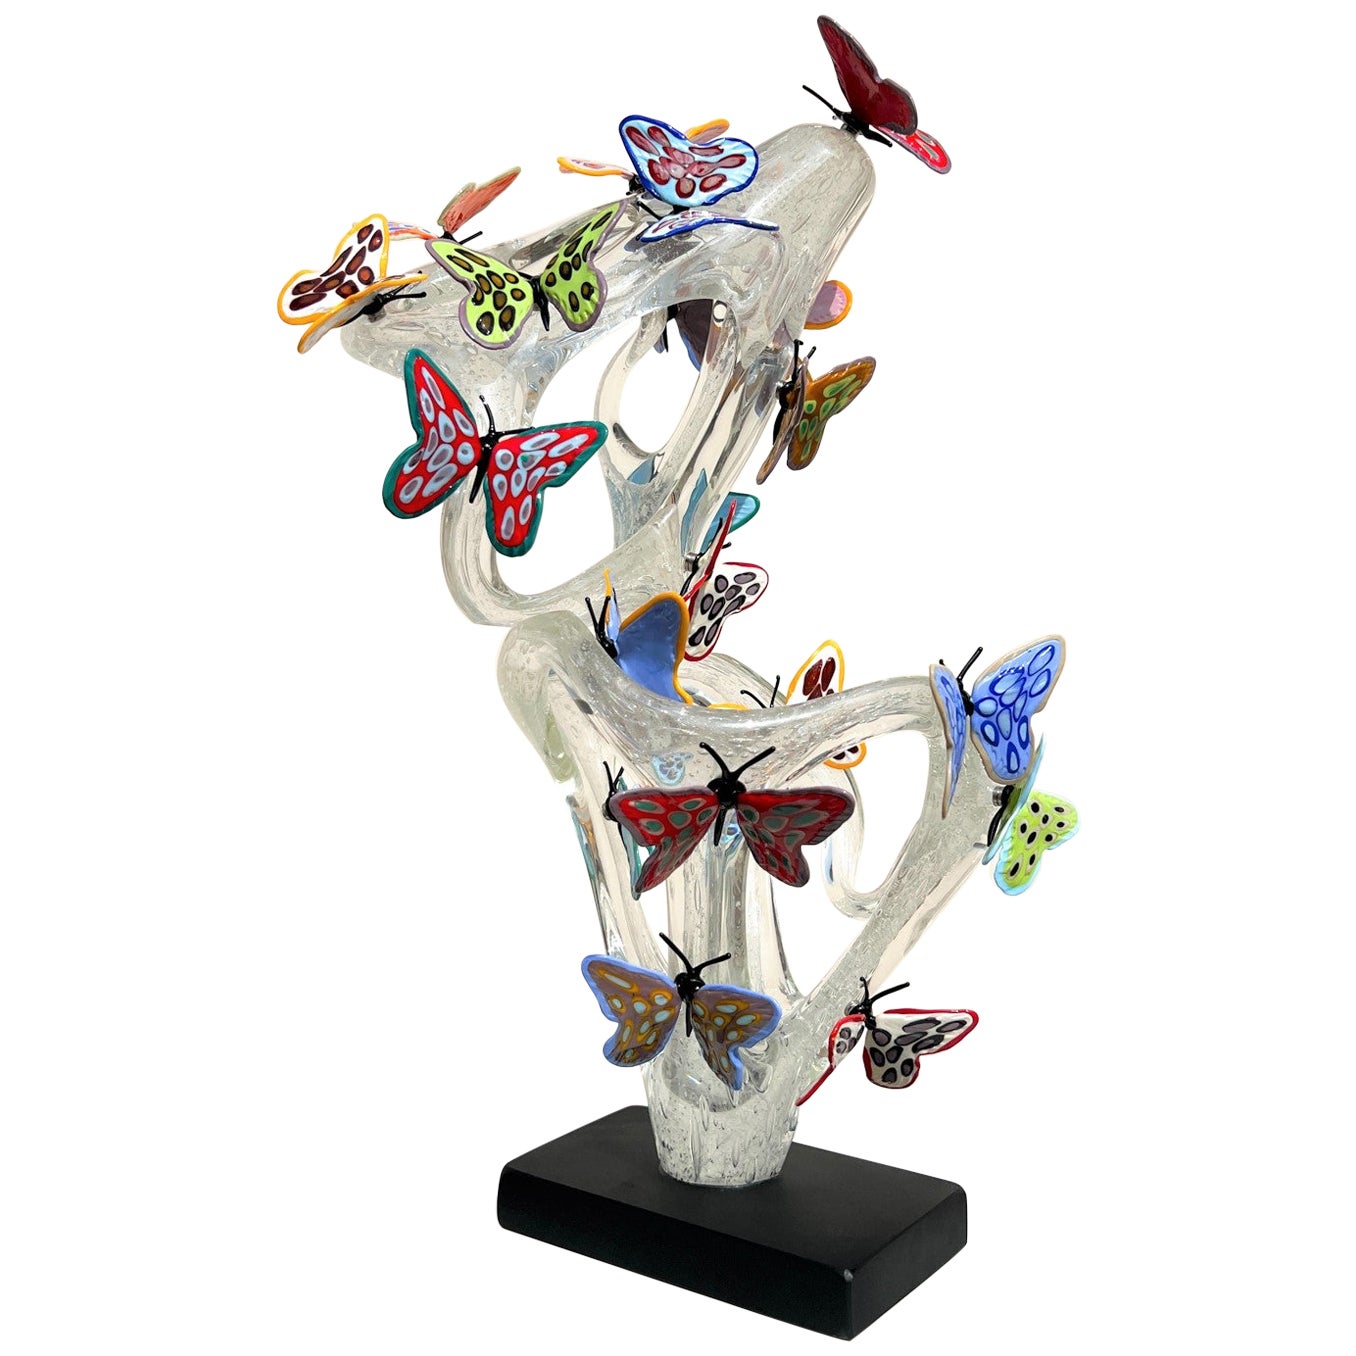 Costantini Diego Modern Crystal Murano Glass Infinity Sculpture avec papillons